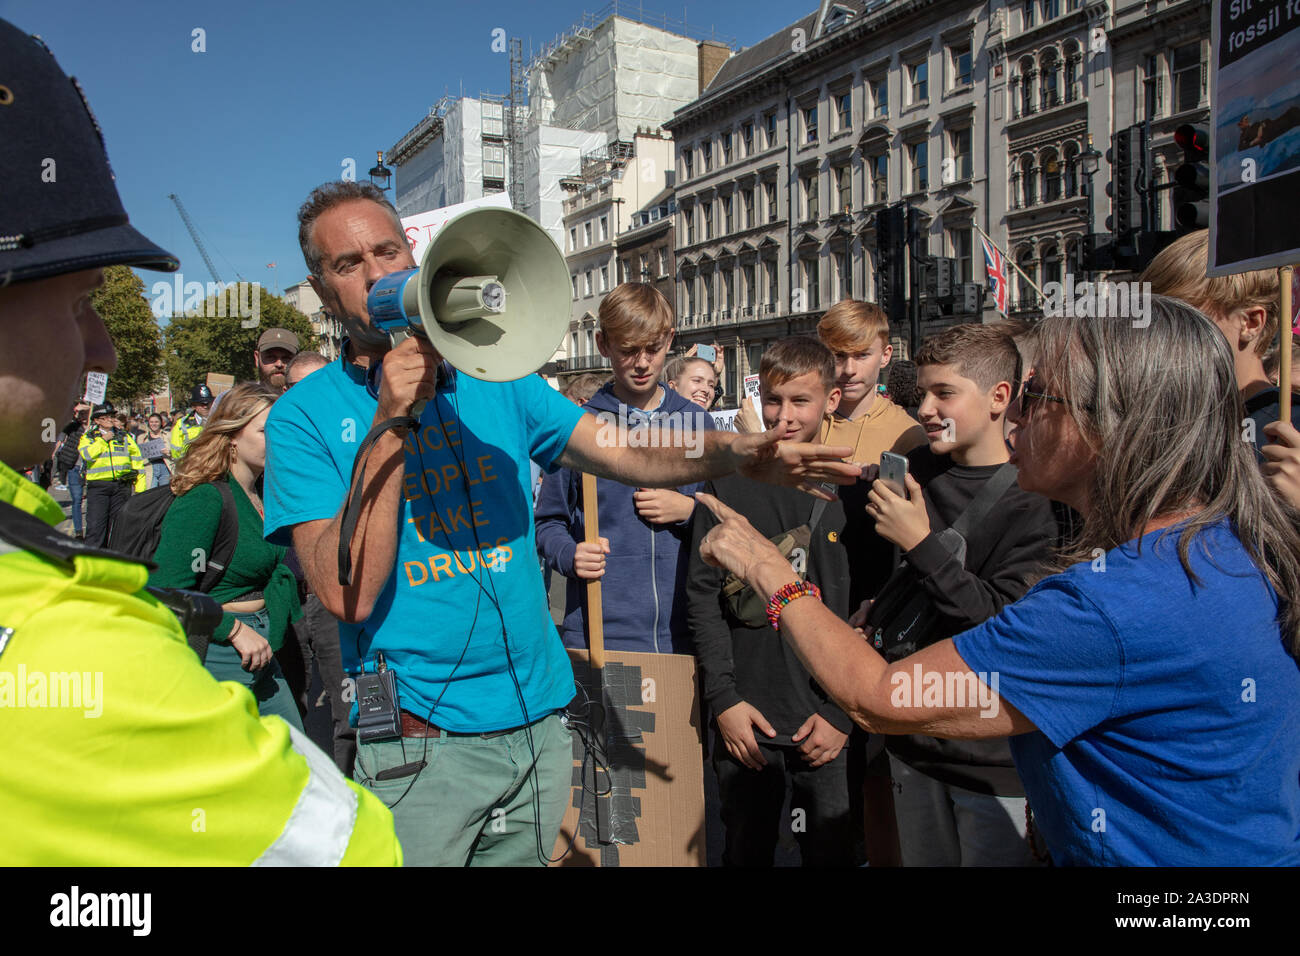 London, UK, 20th September, 2019. London is one of the many cities in the world a global youth climate strike takes place, in and around Parliament, bringing together many young people and adults, on a school day, to protest against government inaction of climate change. Credit: Joe Kuis / Alamy News and Reportage Stock Photo